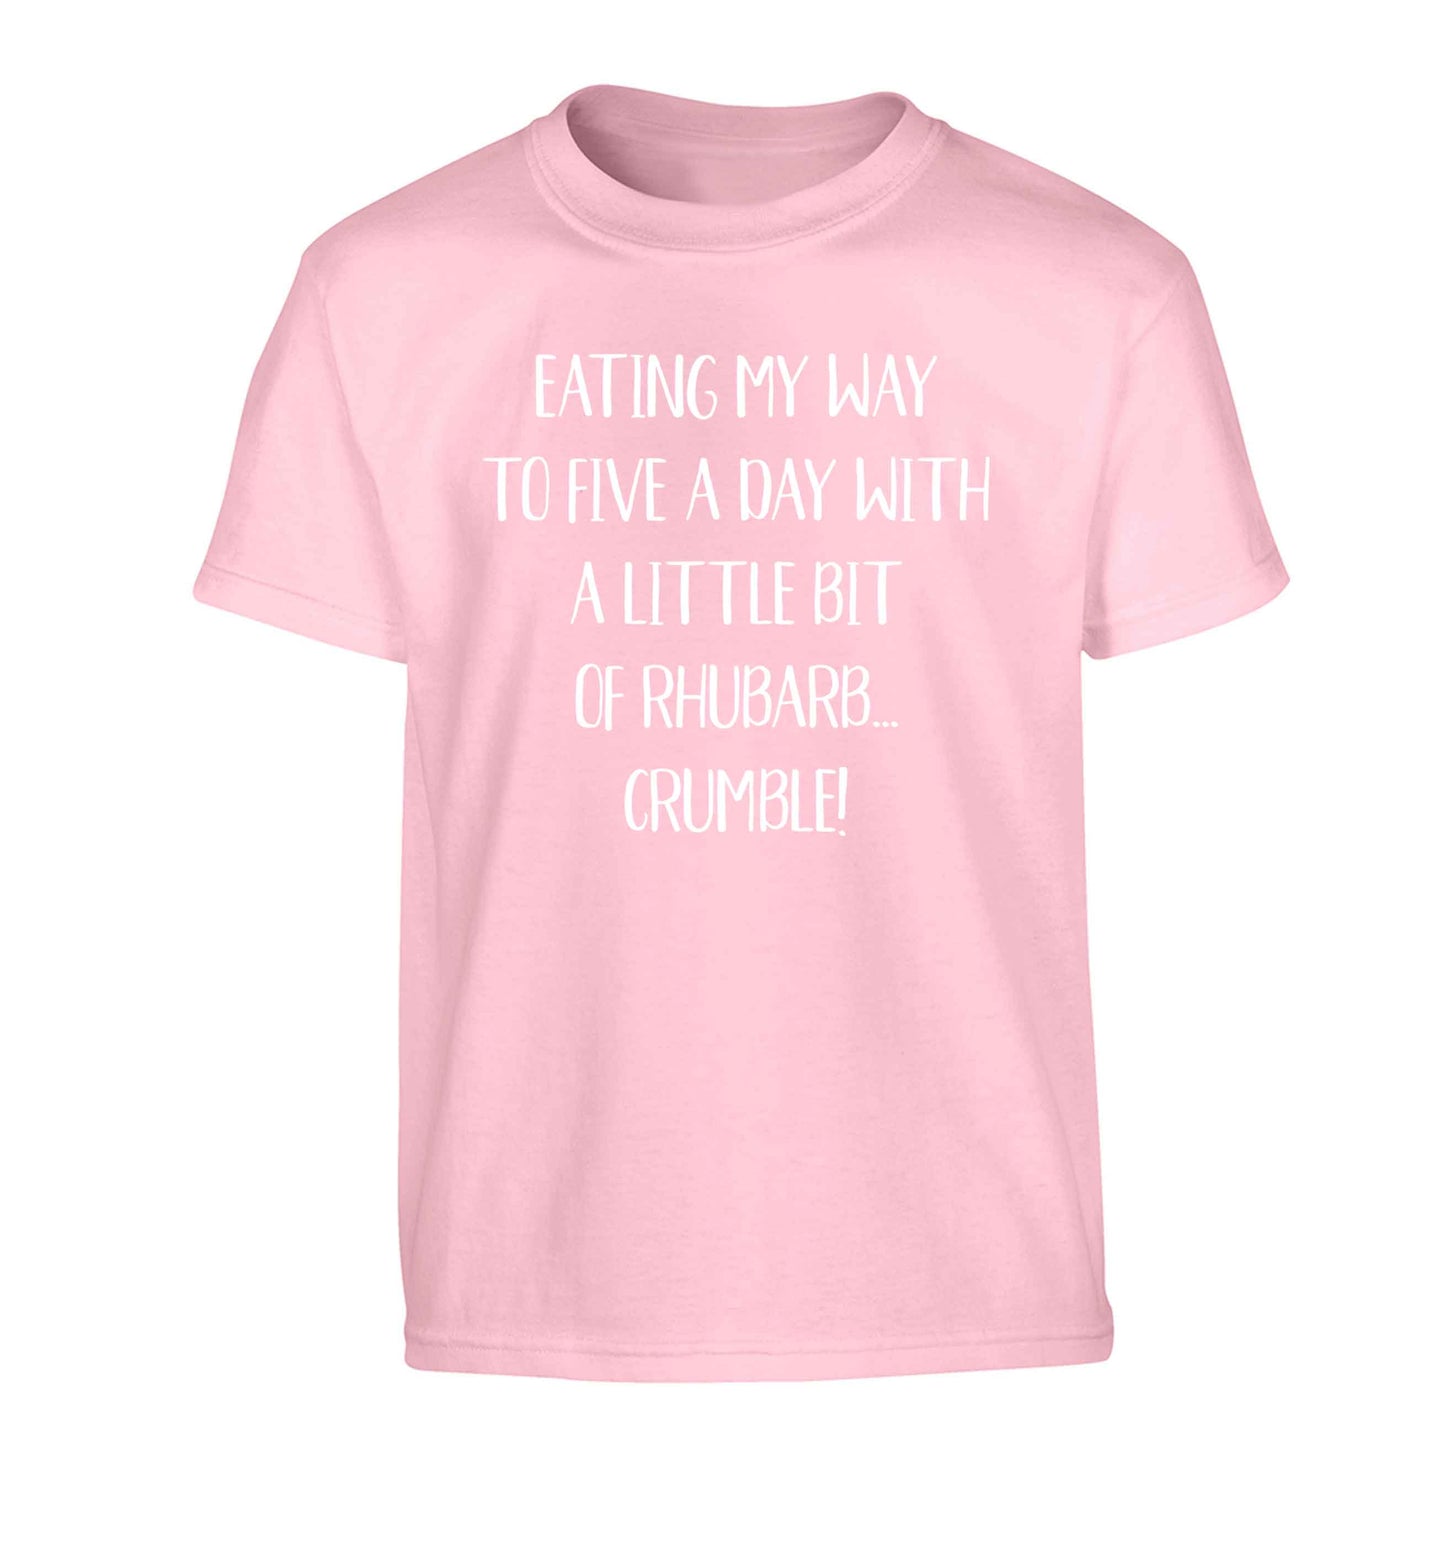 Eating my way to five a day with a little bit of rhubarb crumble Children's light pink Tshirt 12-13 Years